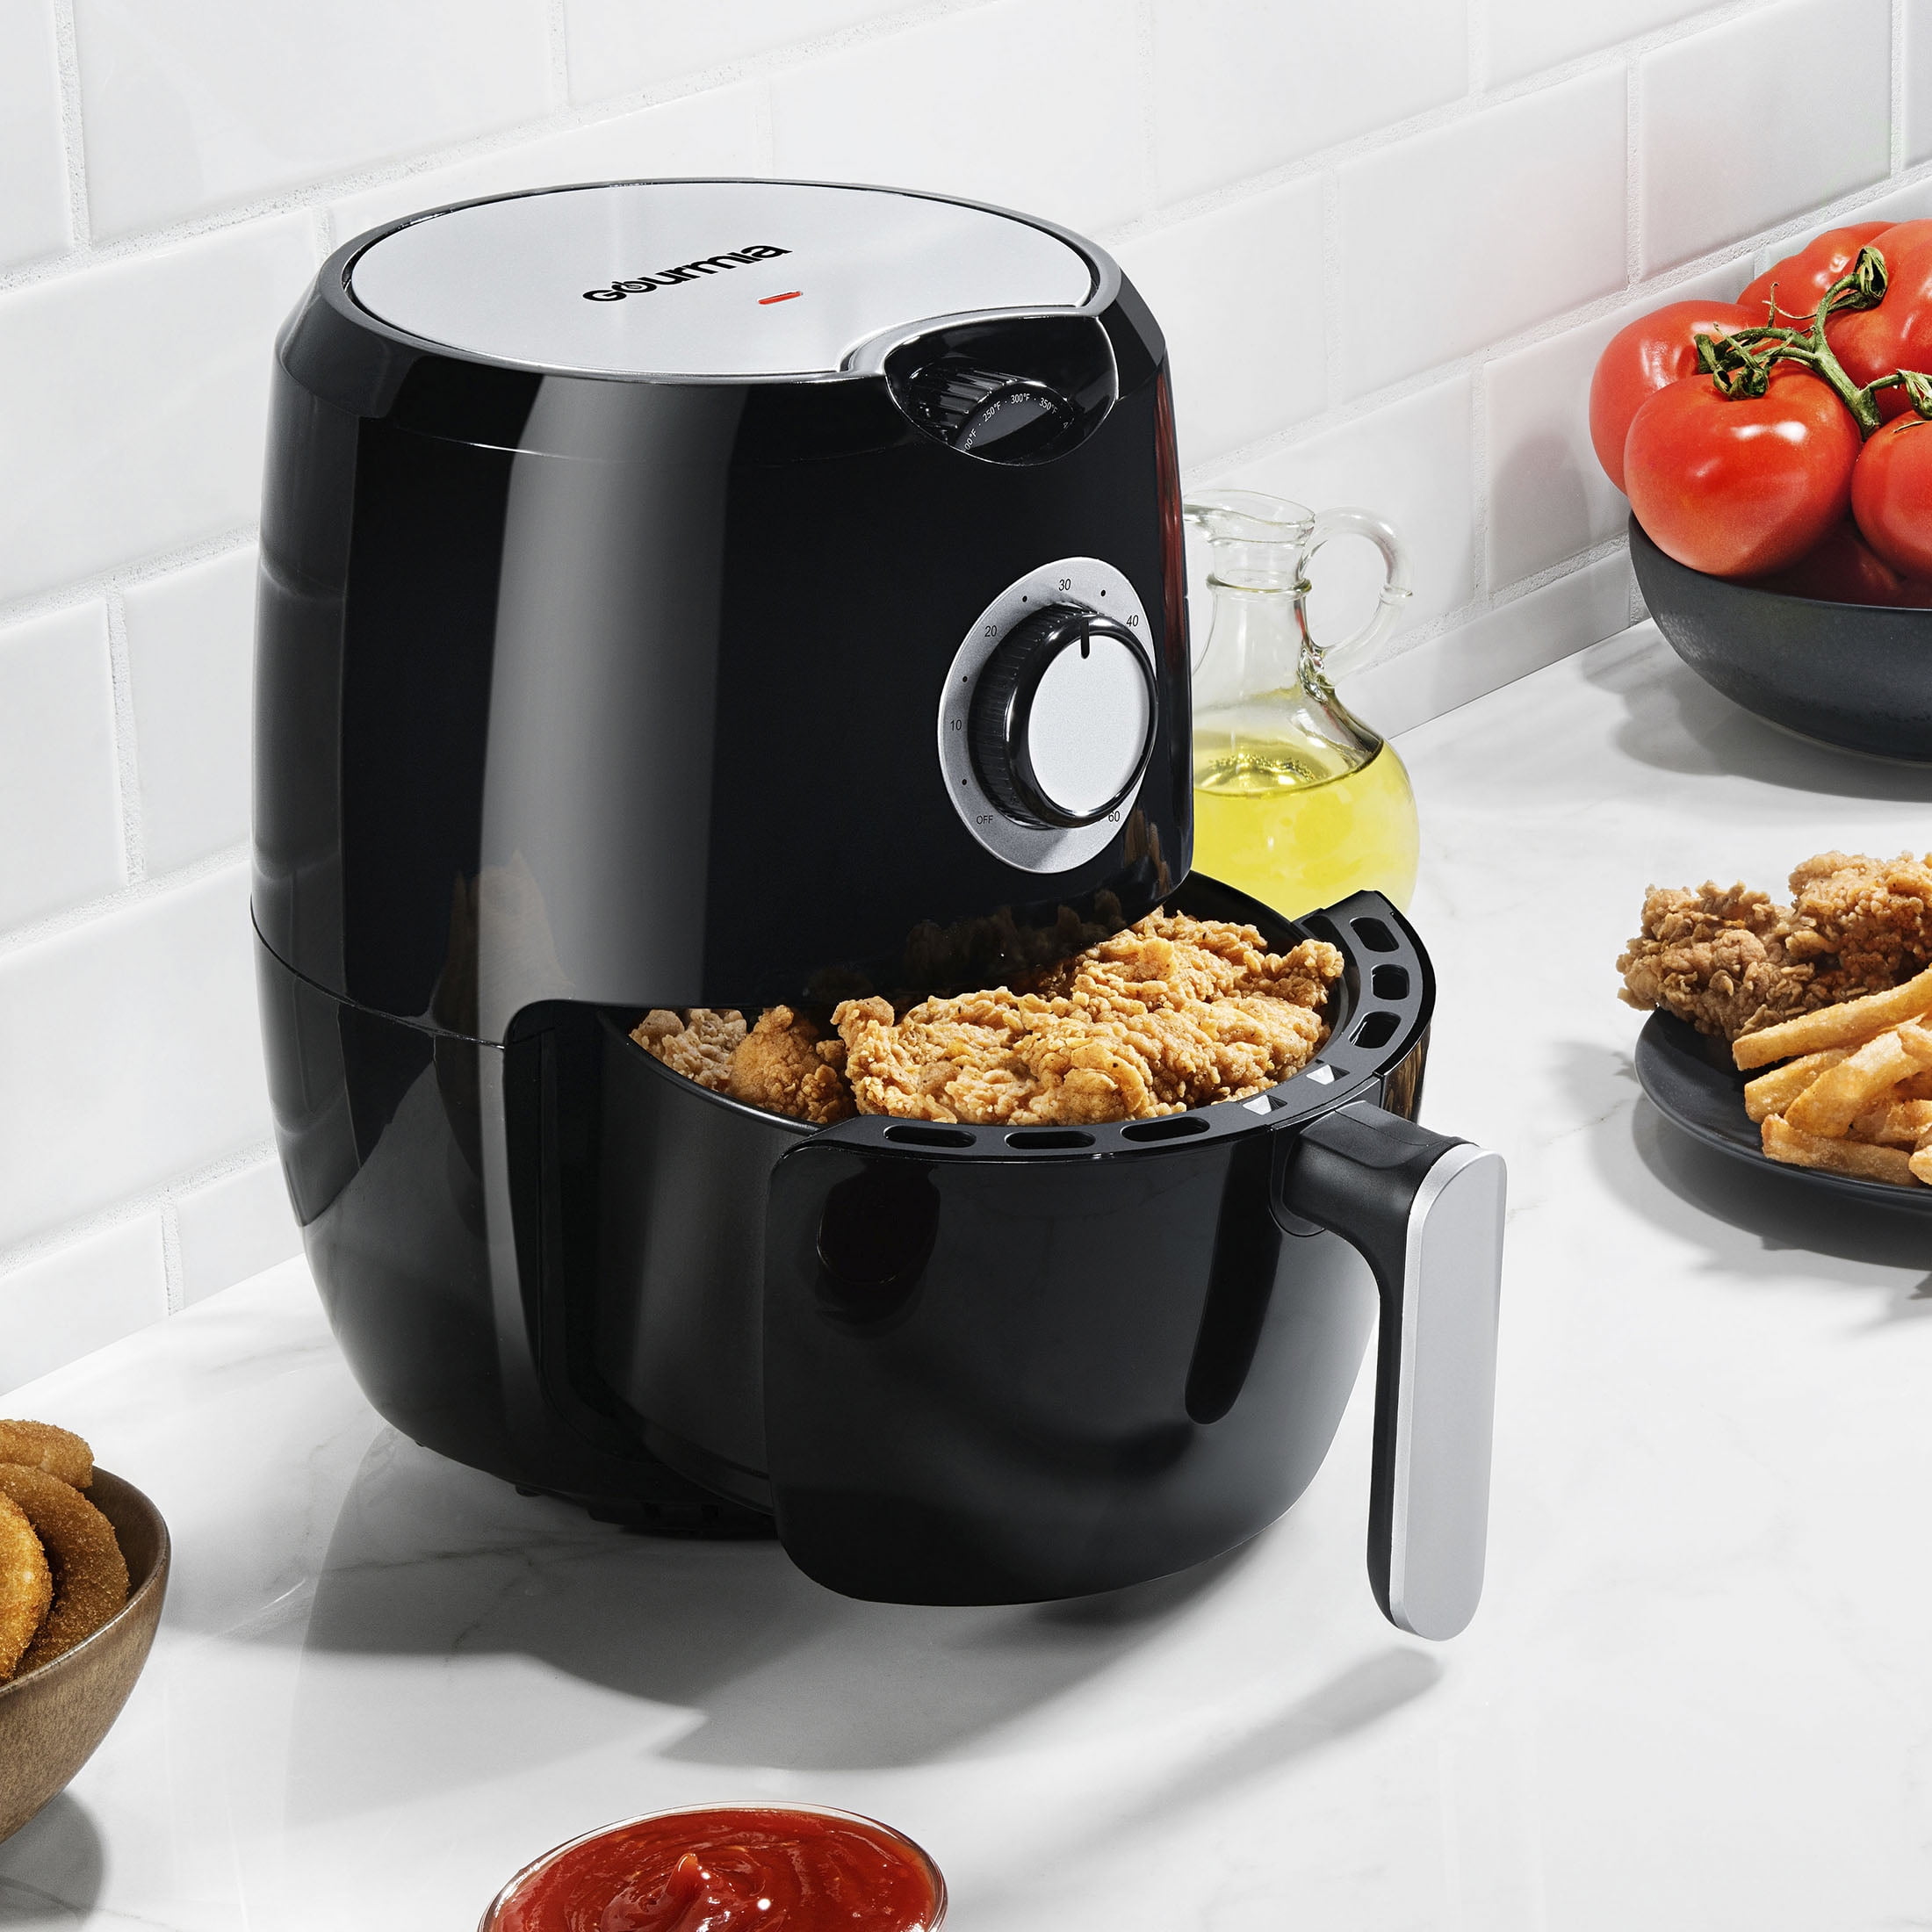 Gourmia's New Pressure Cooker Air Fryers Combines Two of Today's